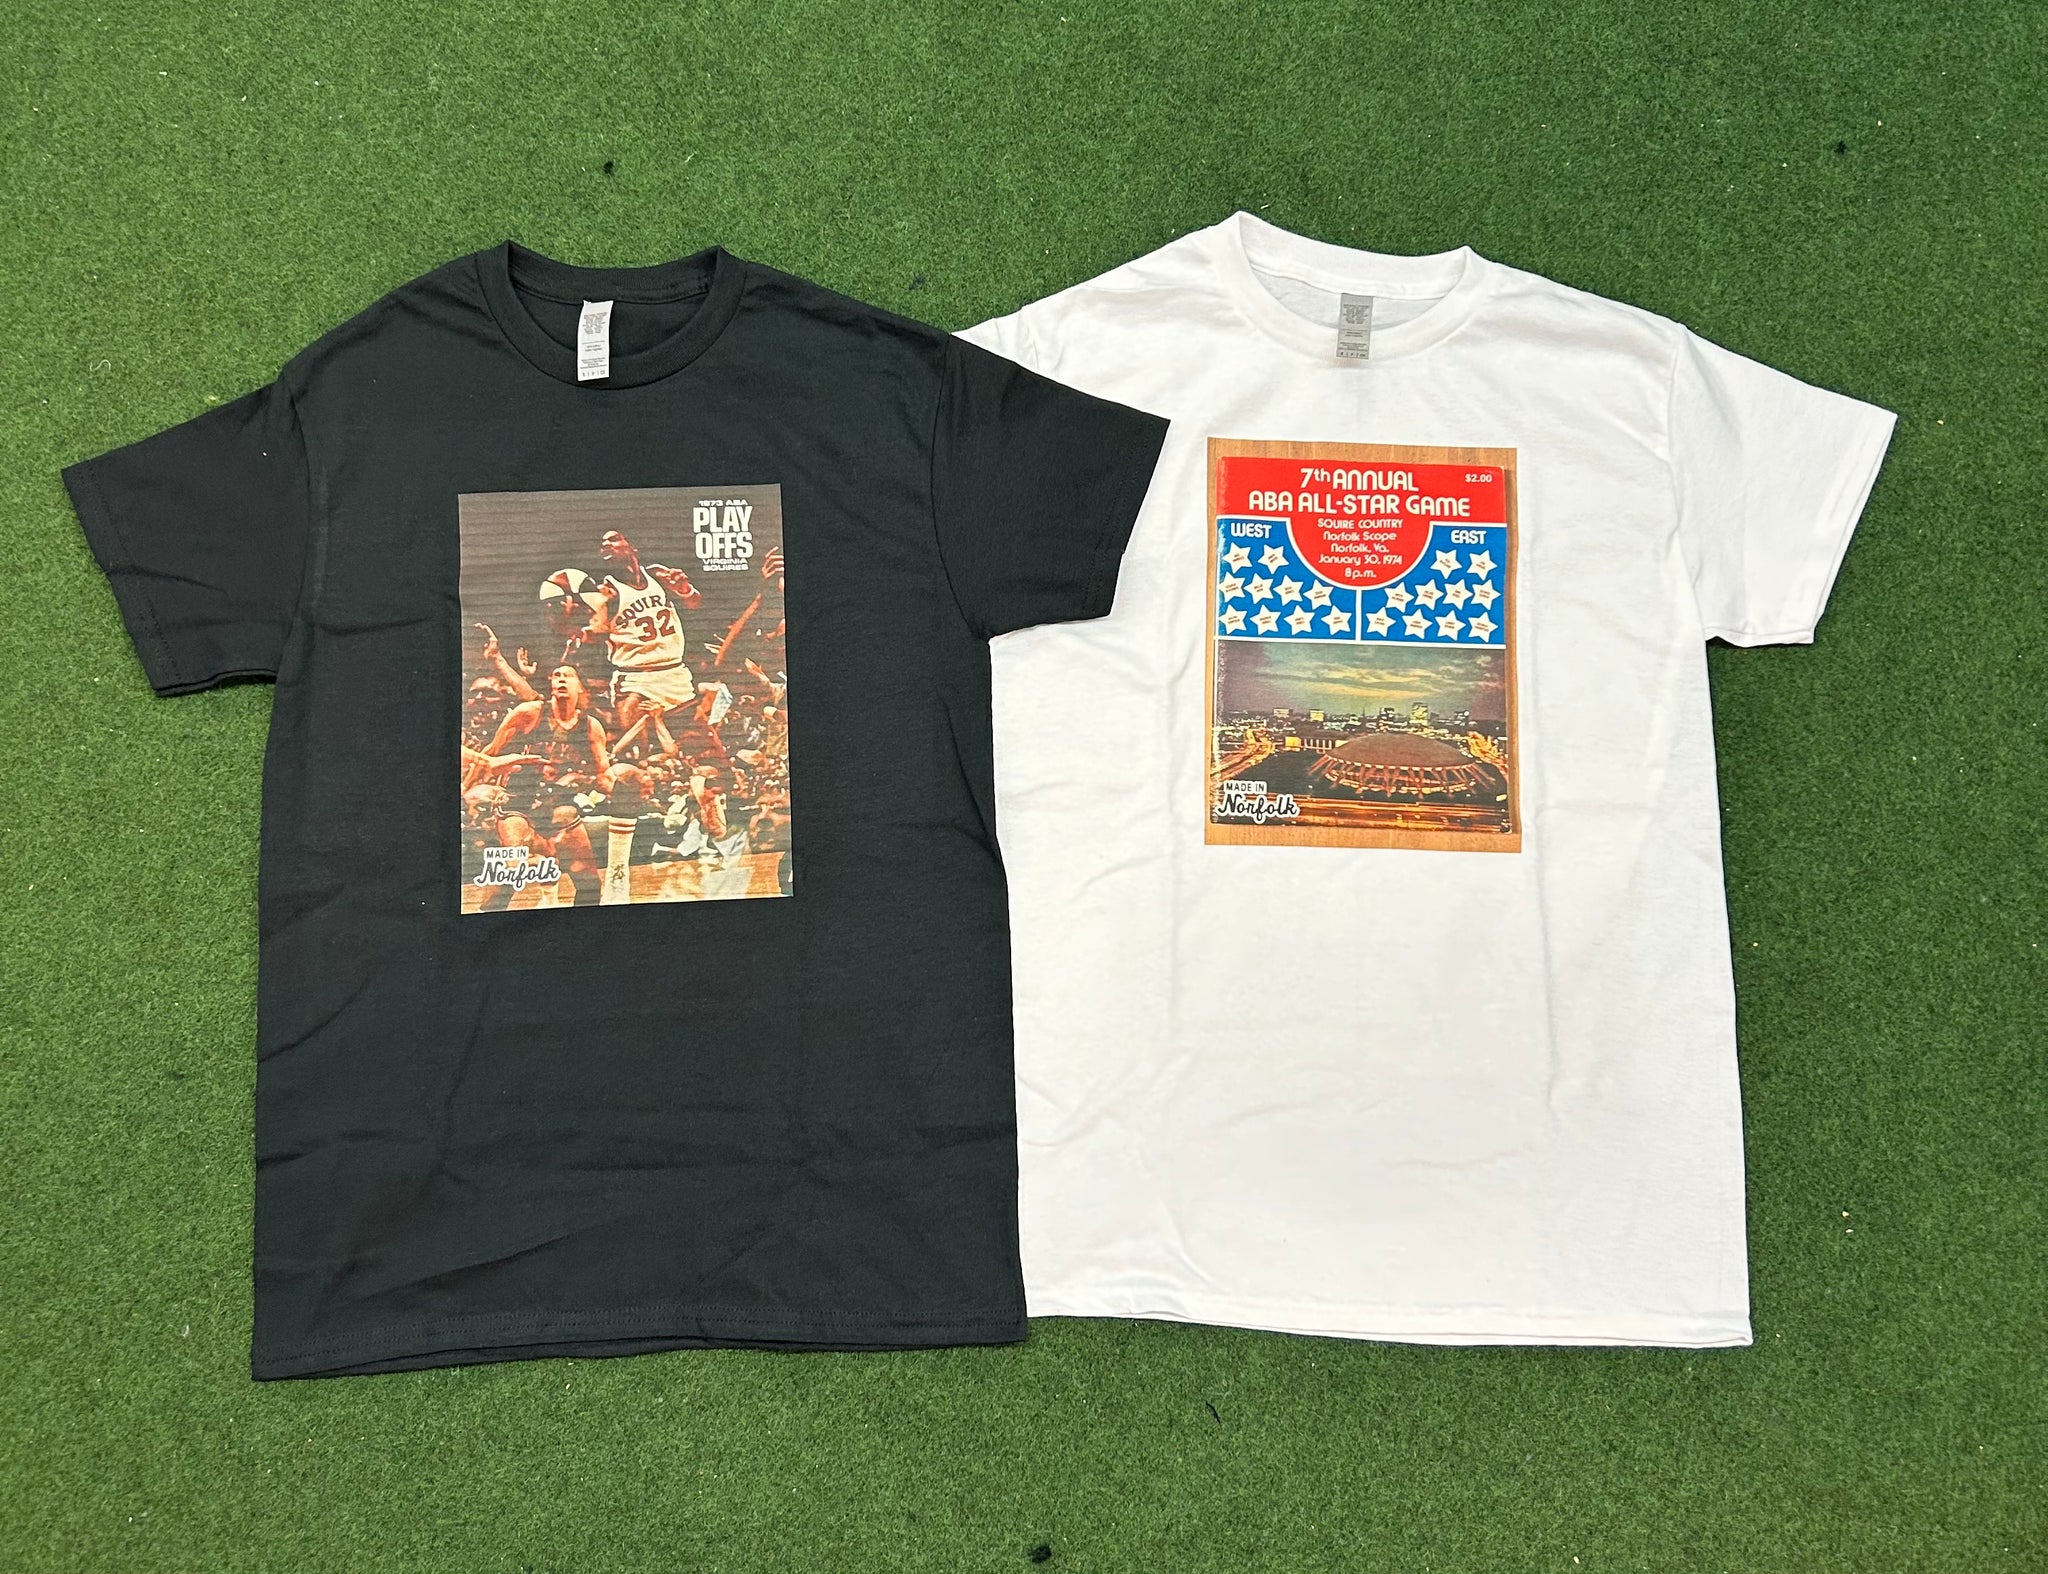 Made In Norfolk “ABA” Themed Tees